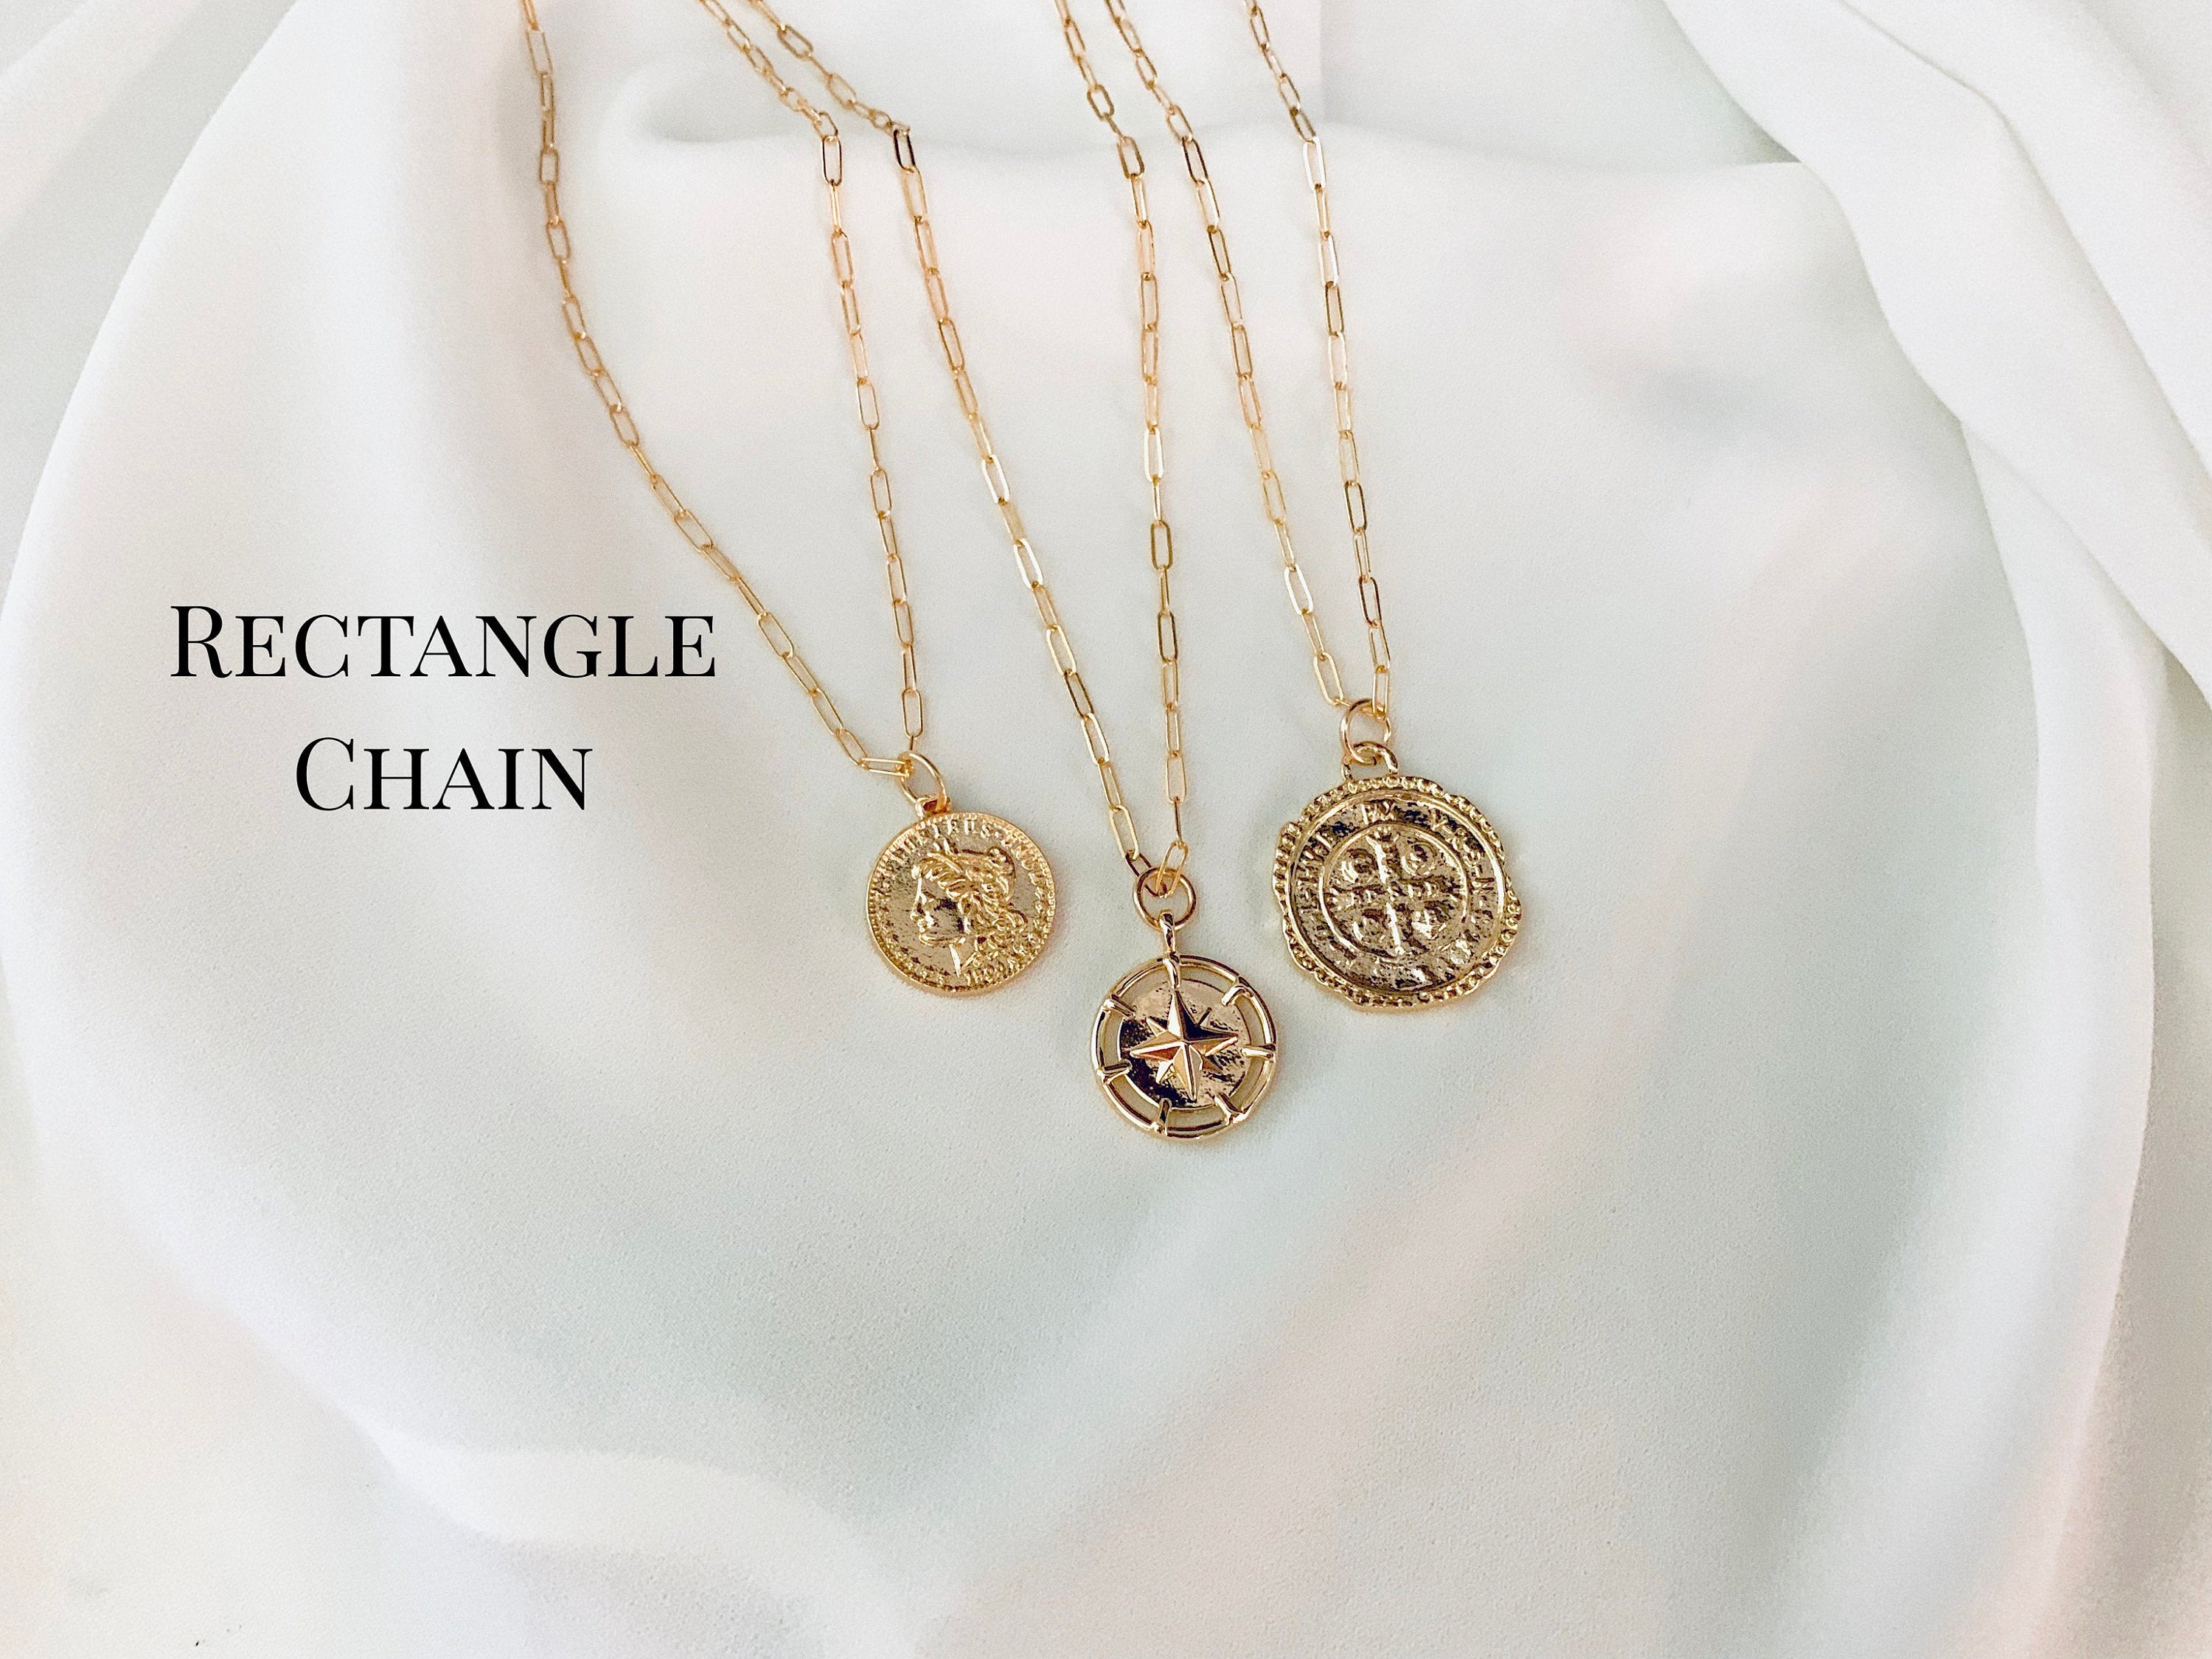 Gold Filled Medallion Necklaces - Athena - Cross Coin - Compass Necklace